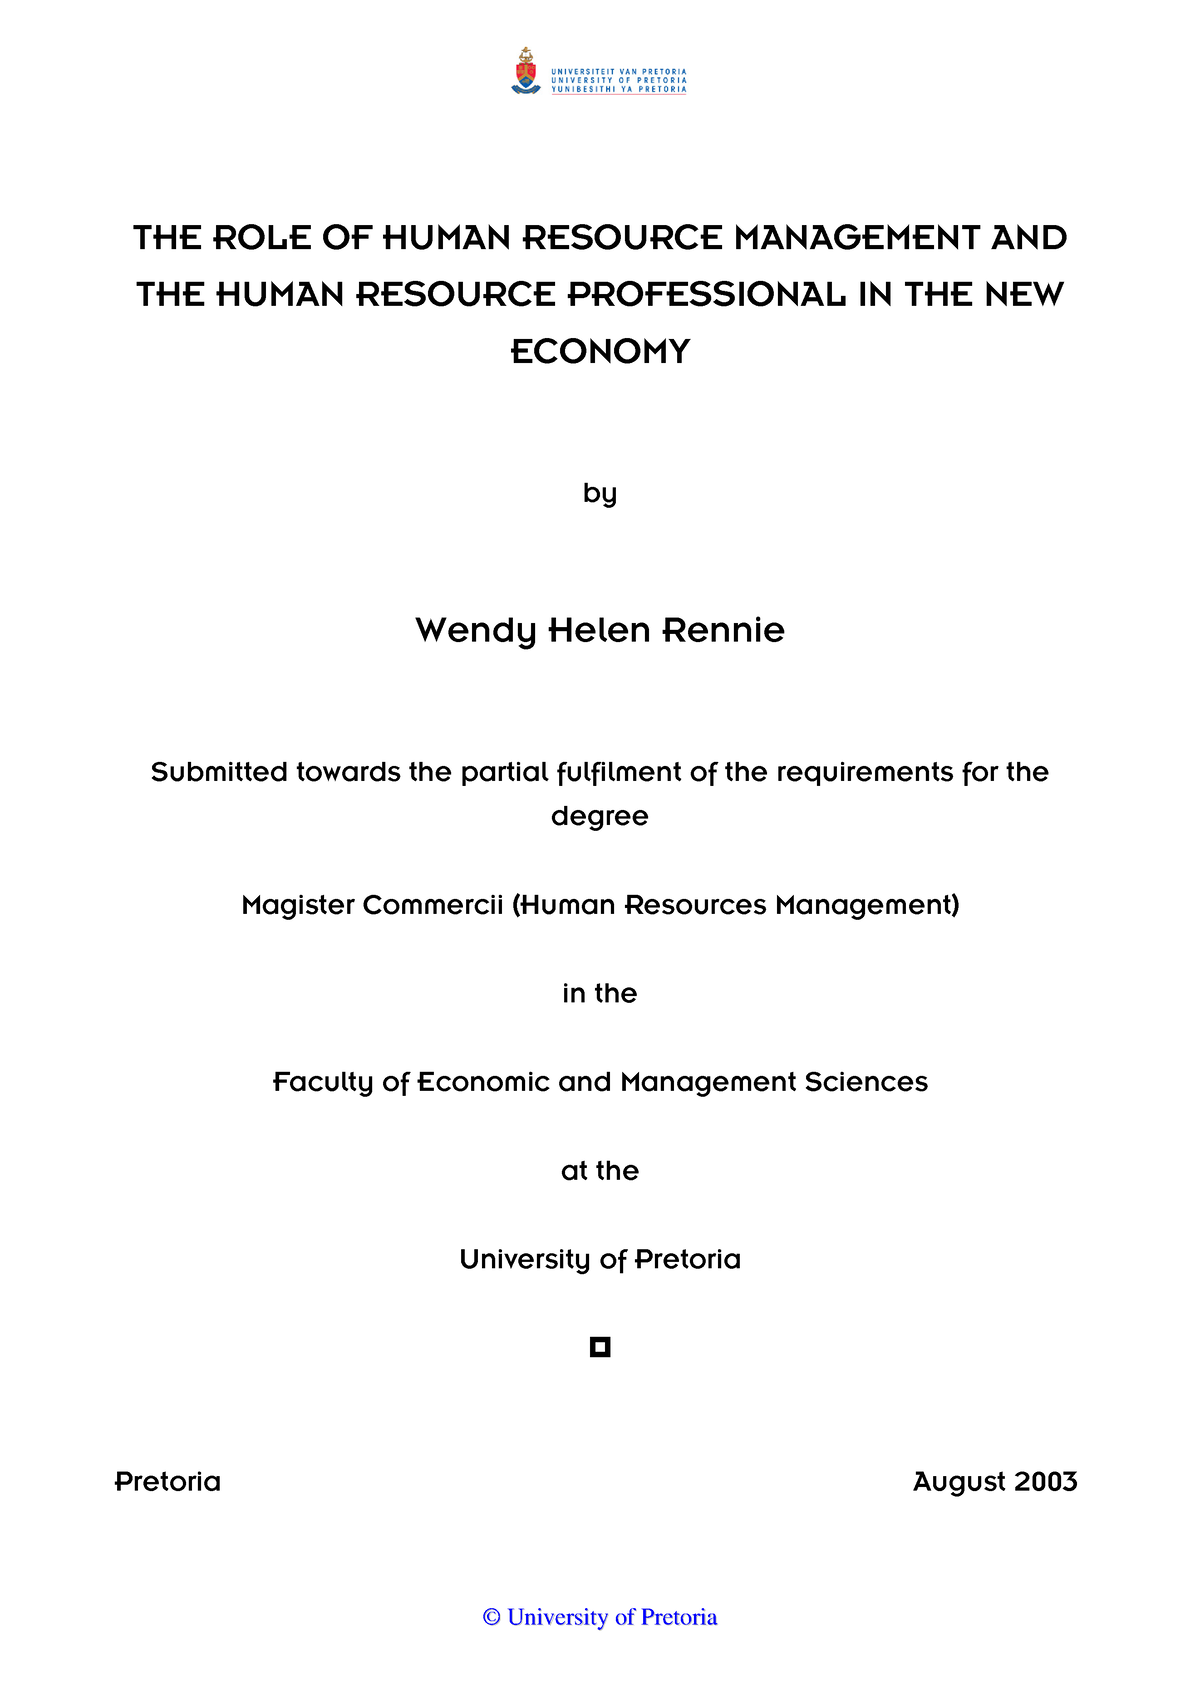 dissertation topics for human resources